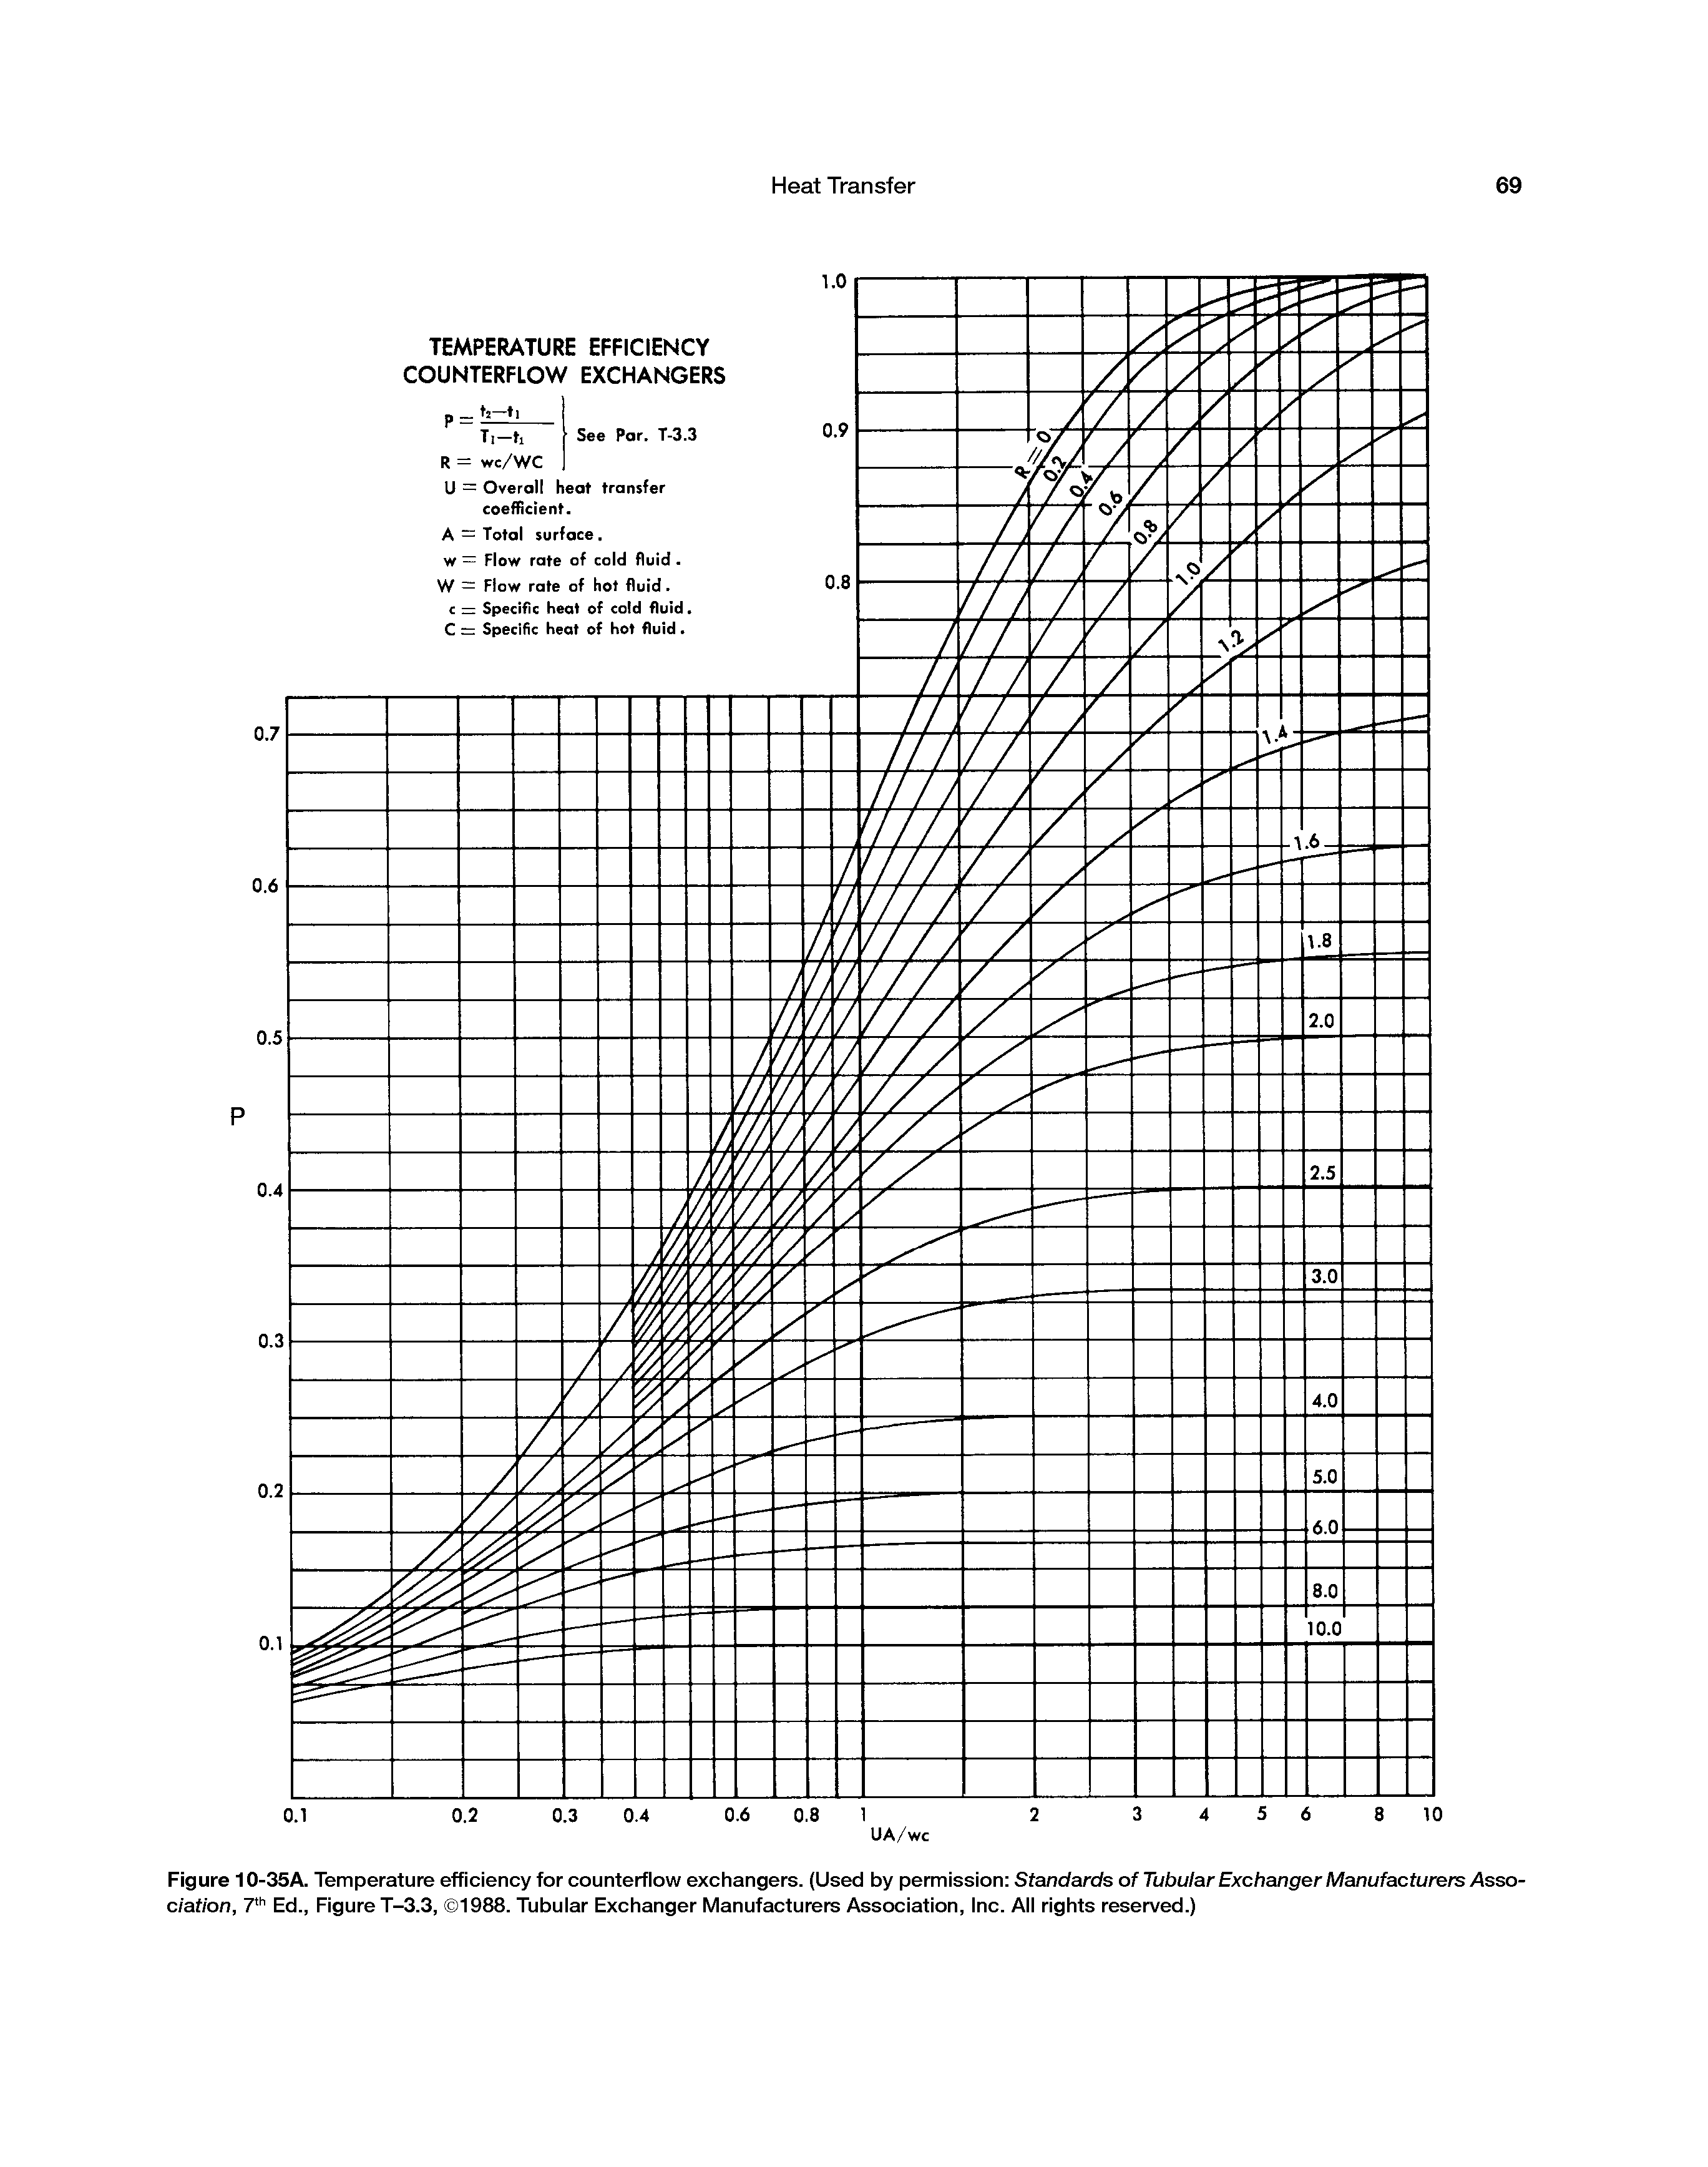 Figure 10-35A. Temperature efficiency for counterflow exchangers. (Used by permission Standards of Tubular Exchanger Manufacturers Association, 7 Ed., Figure T-3.3, 1988. Tubular Exchanger Manufacturers Association, Inc. All rights reserved.)...